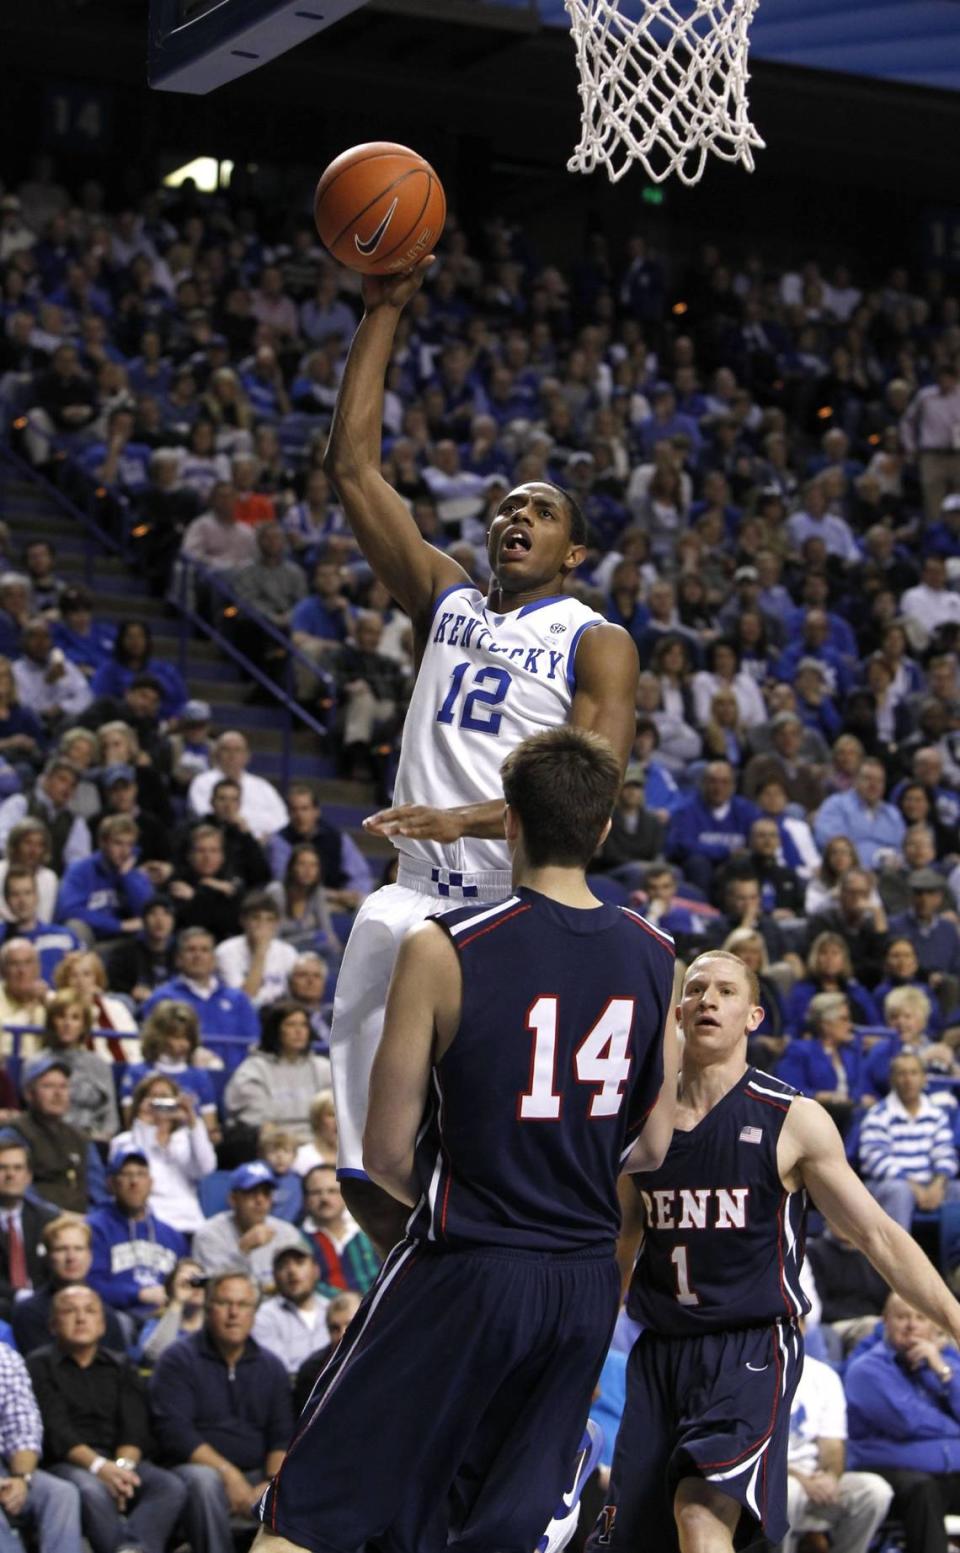 Brandon Knight (12) scored 22 points to pace Kentucky to an 86-62 win over Pennsylvania on Jan. 3, 2011.